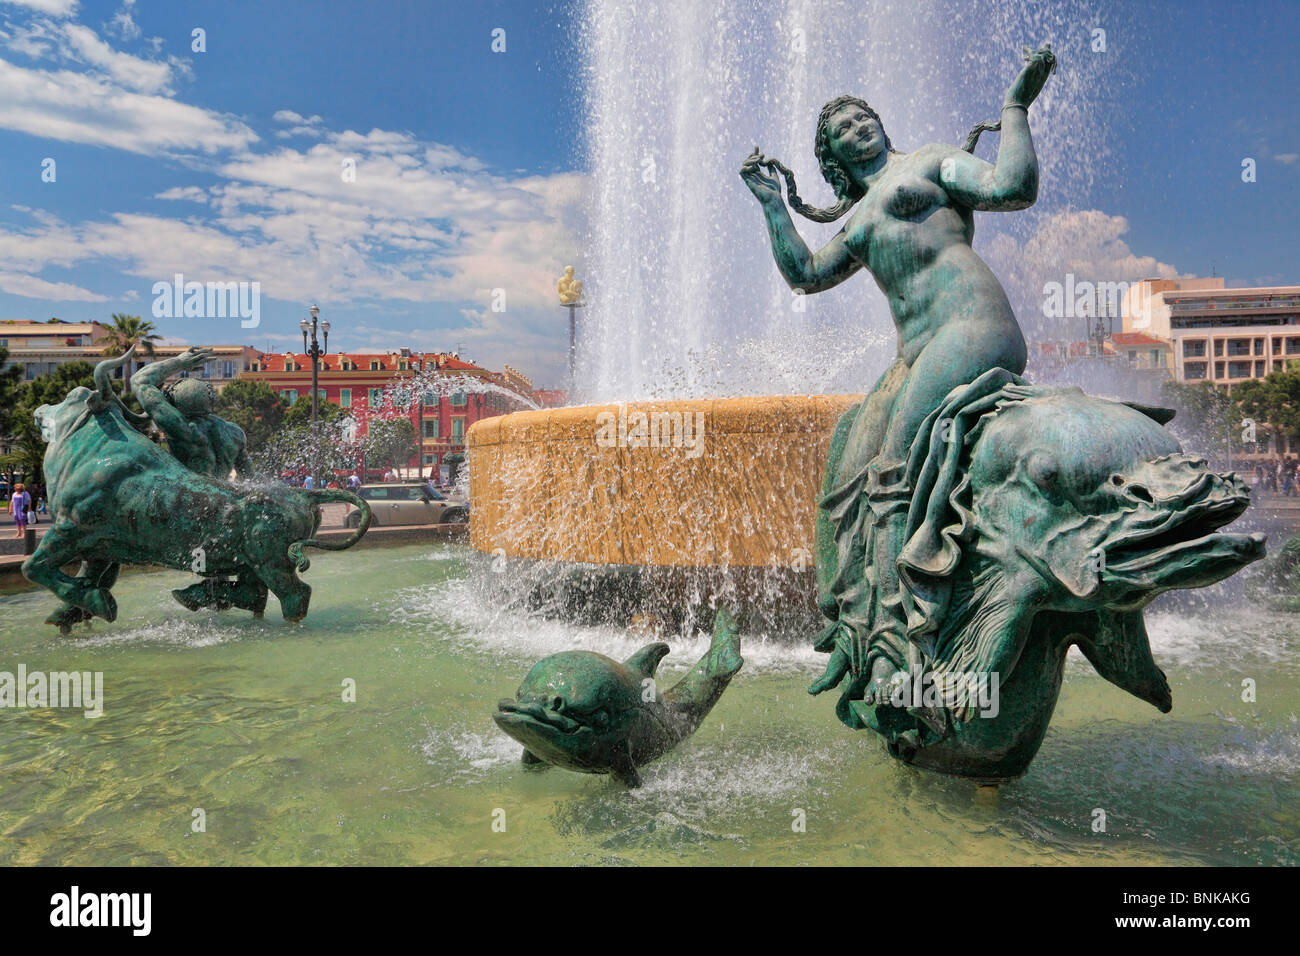 Fountains at Place Massena in downtown Nice on the French Riviera (Cote d'Azur) Stock Photo